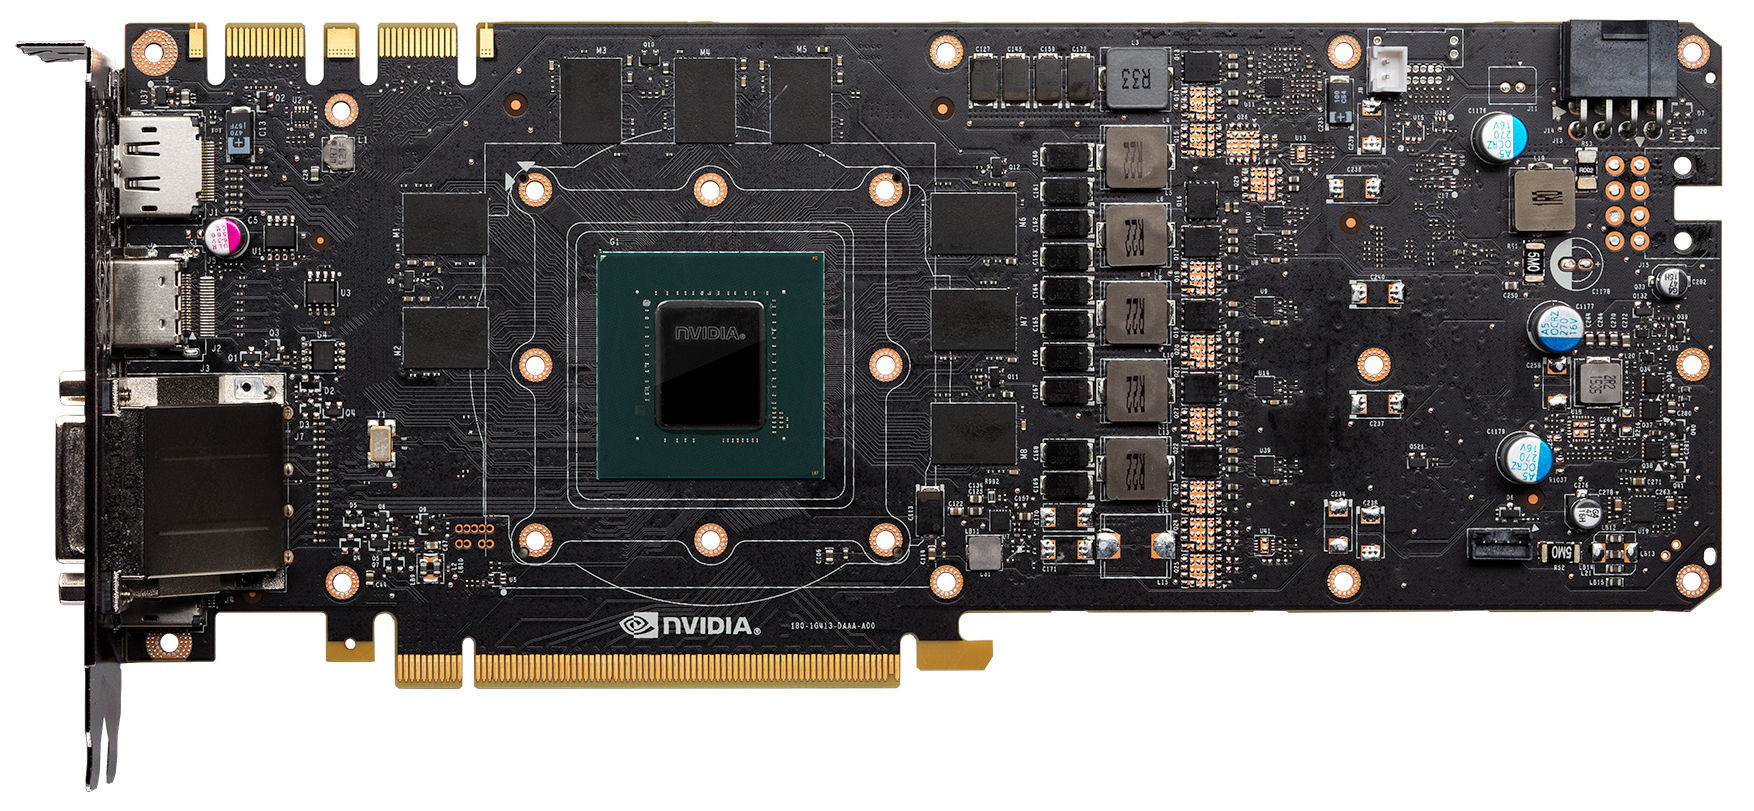 NVIDIA GeForce GTX 1070 Reference PCB Pictured | TechPowerUp Forums